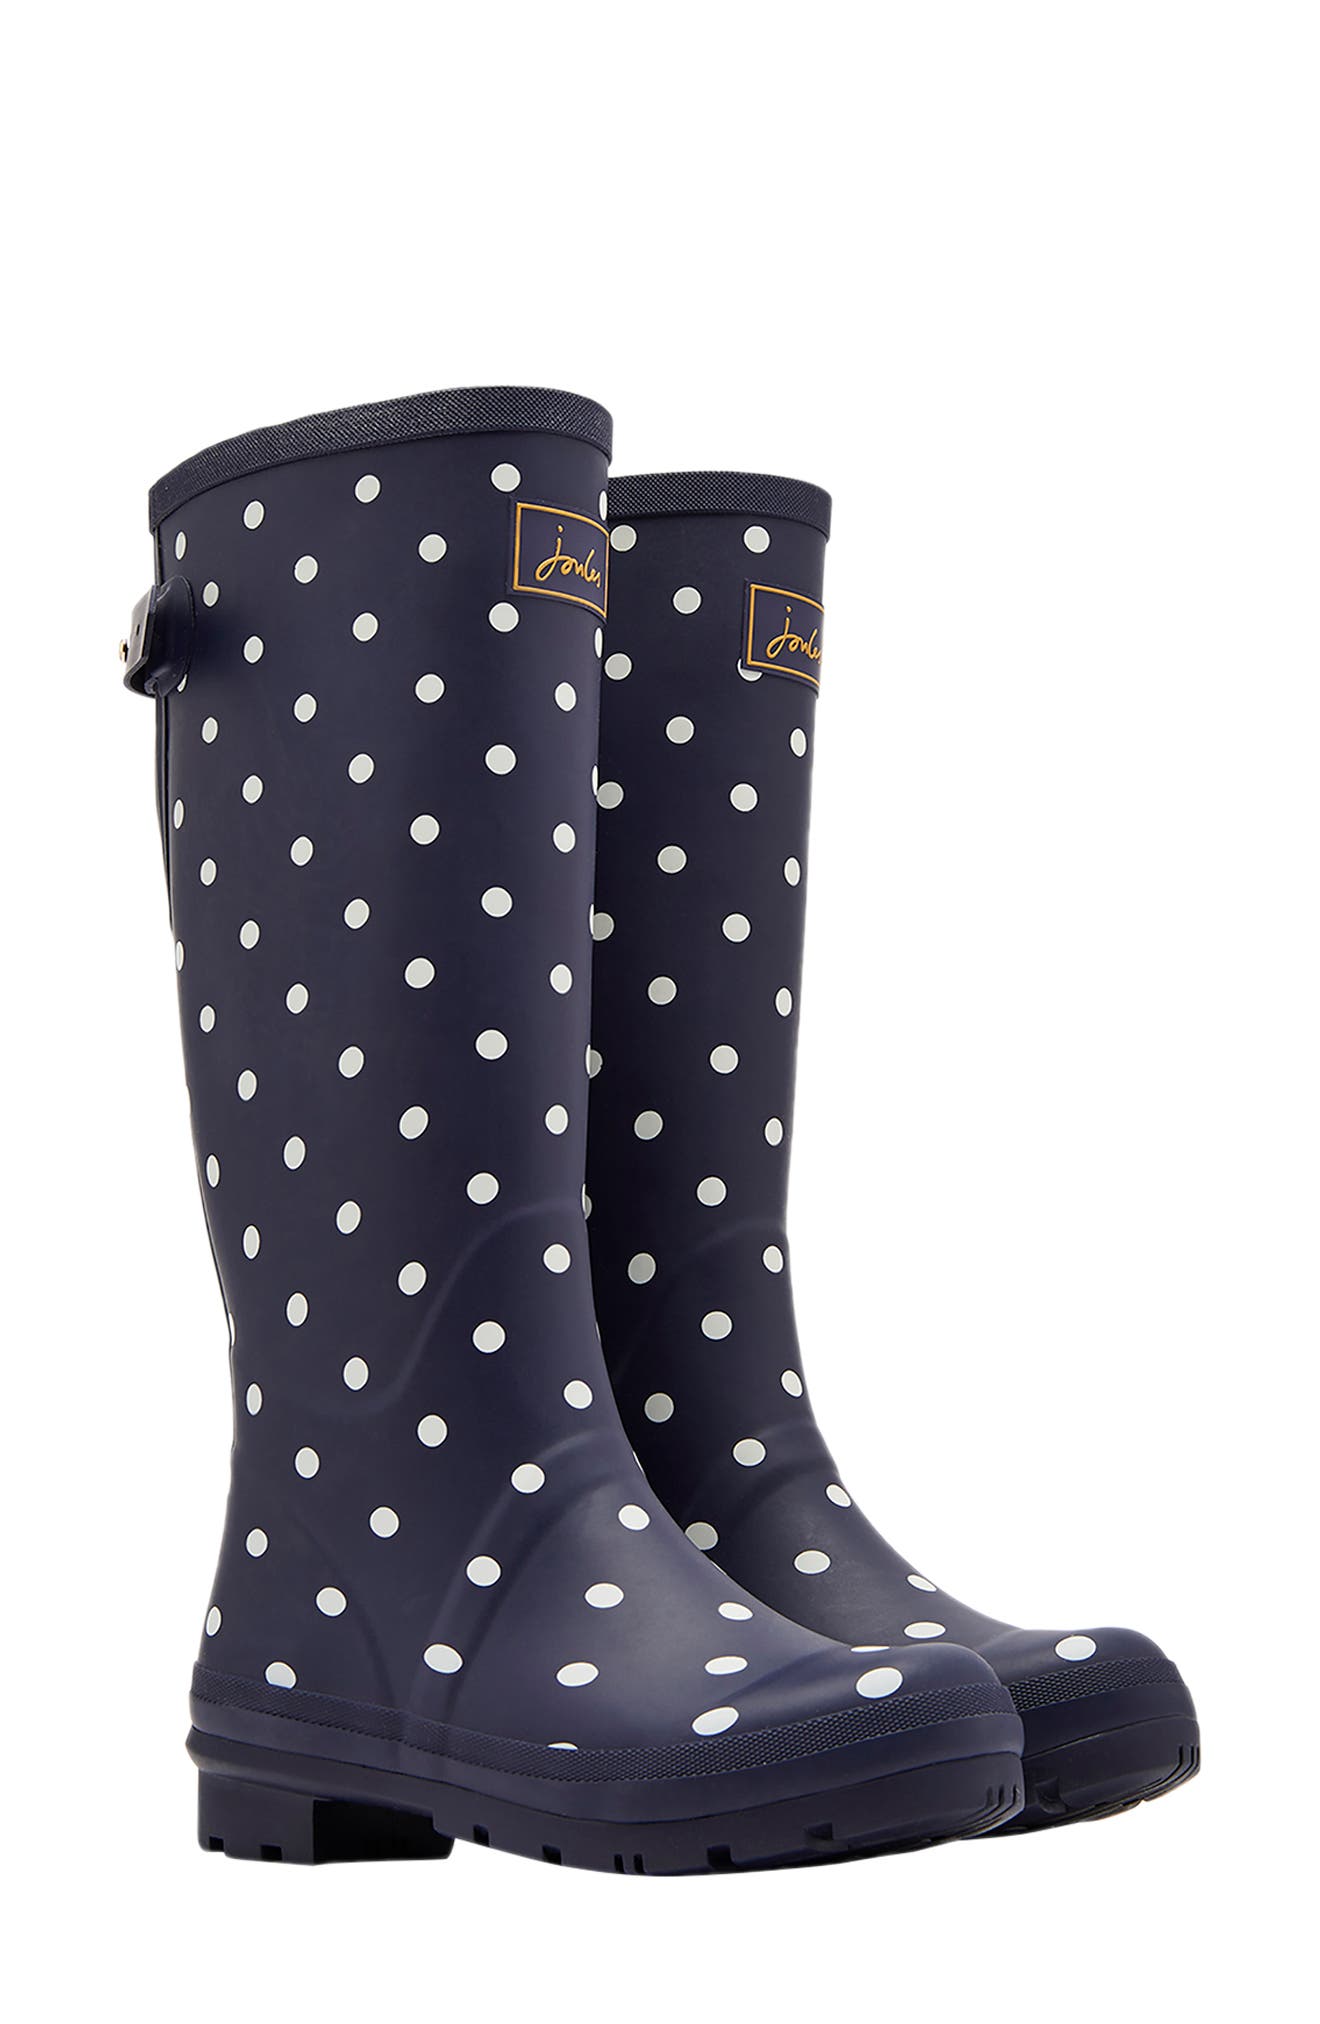 New Junior Boys Fun Wellies Size 5 Joules Blue Striped 